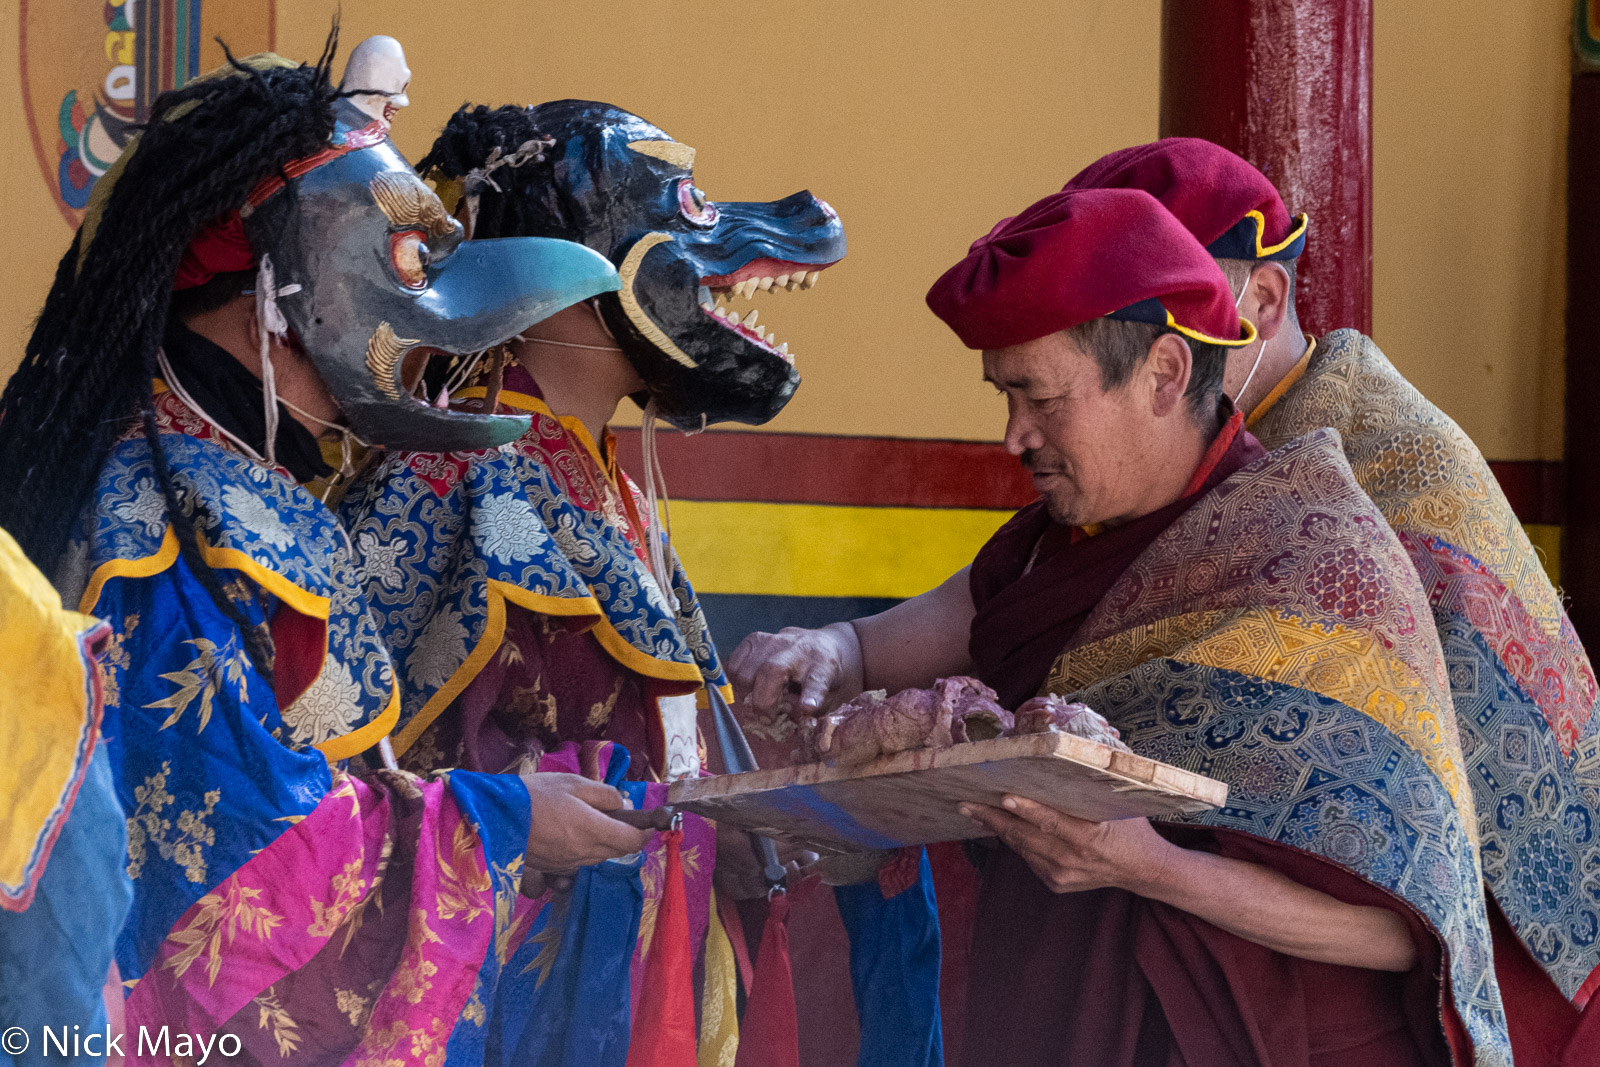 The sacred clay effigy being divided into small pieces to monks participating in the winrer festival at Hemis monastery.